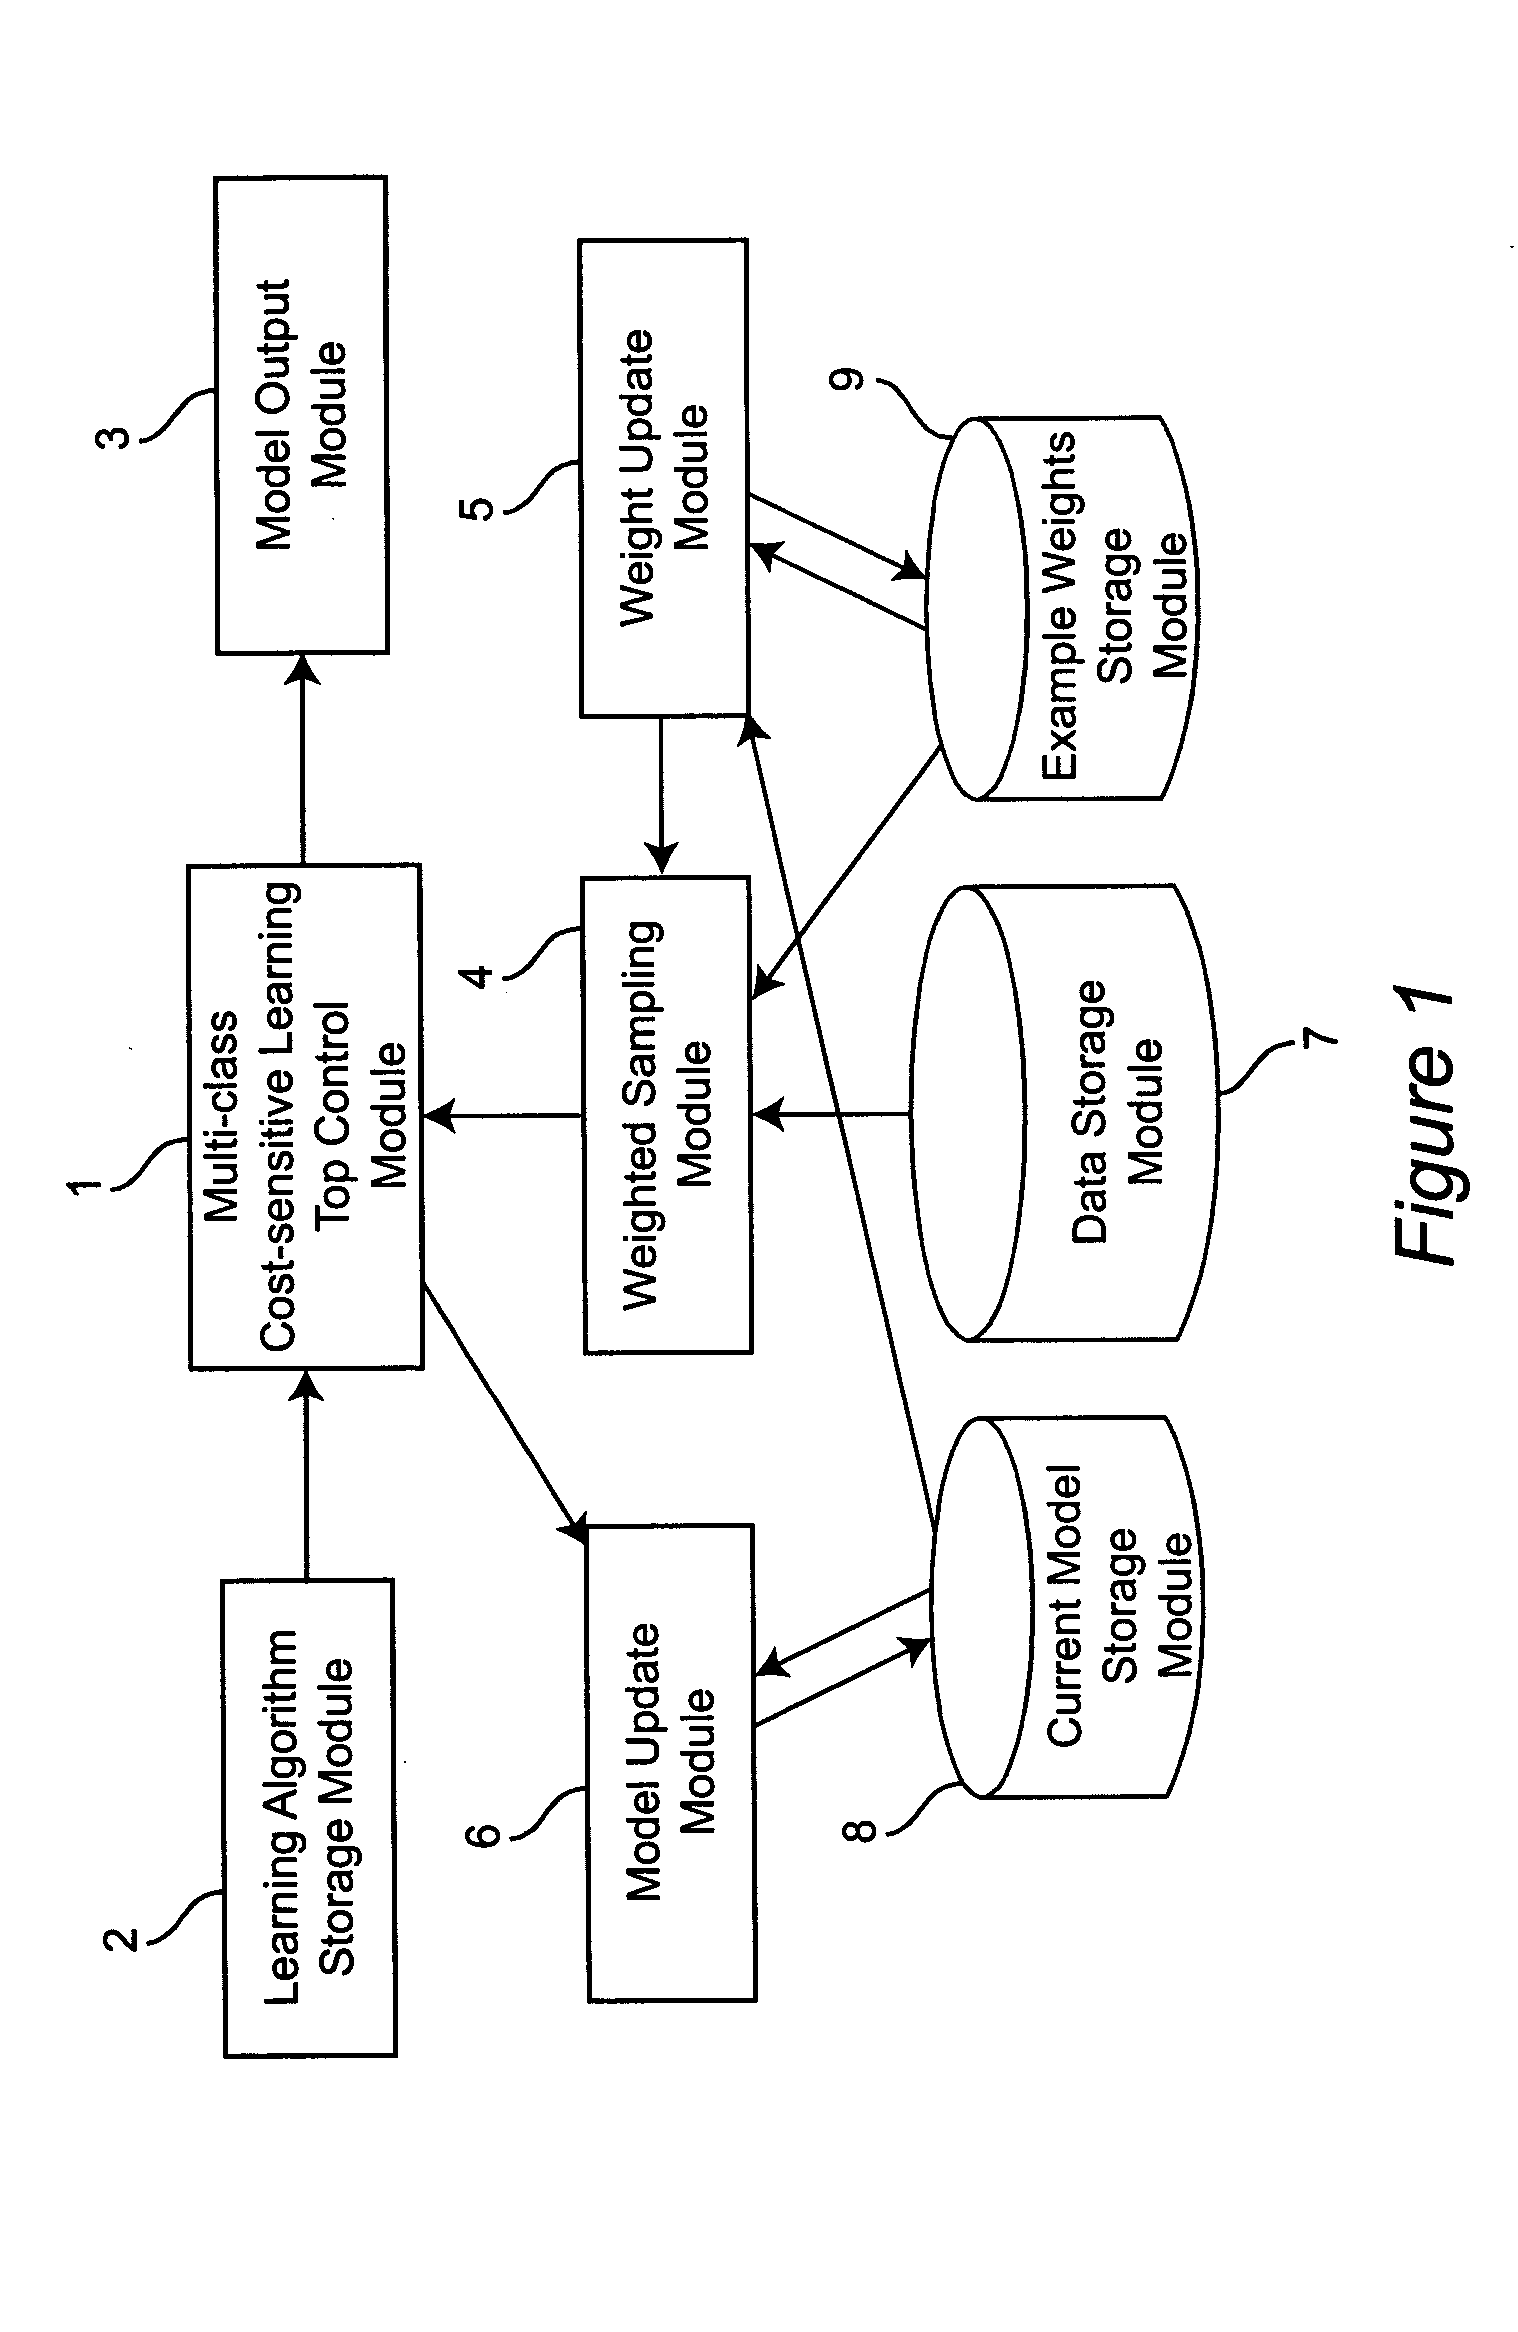 Methods for multi-class cost-sensitive learning